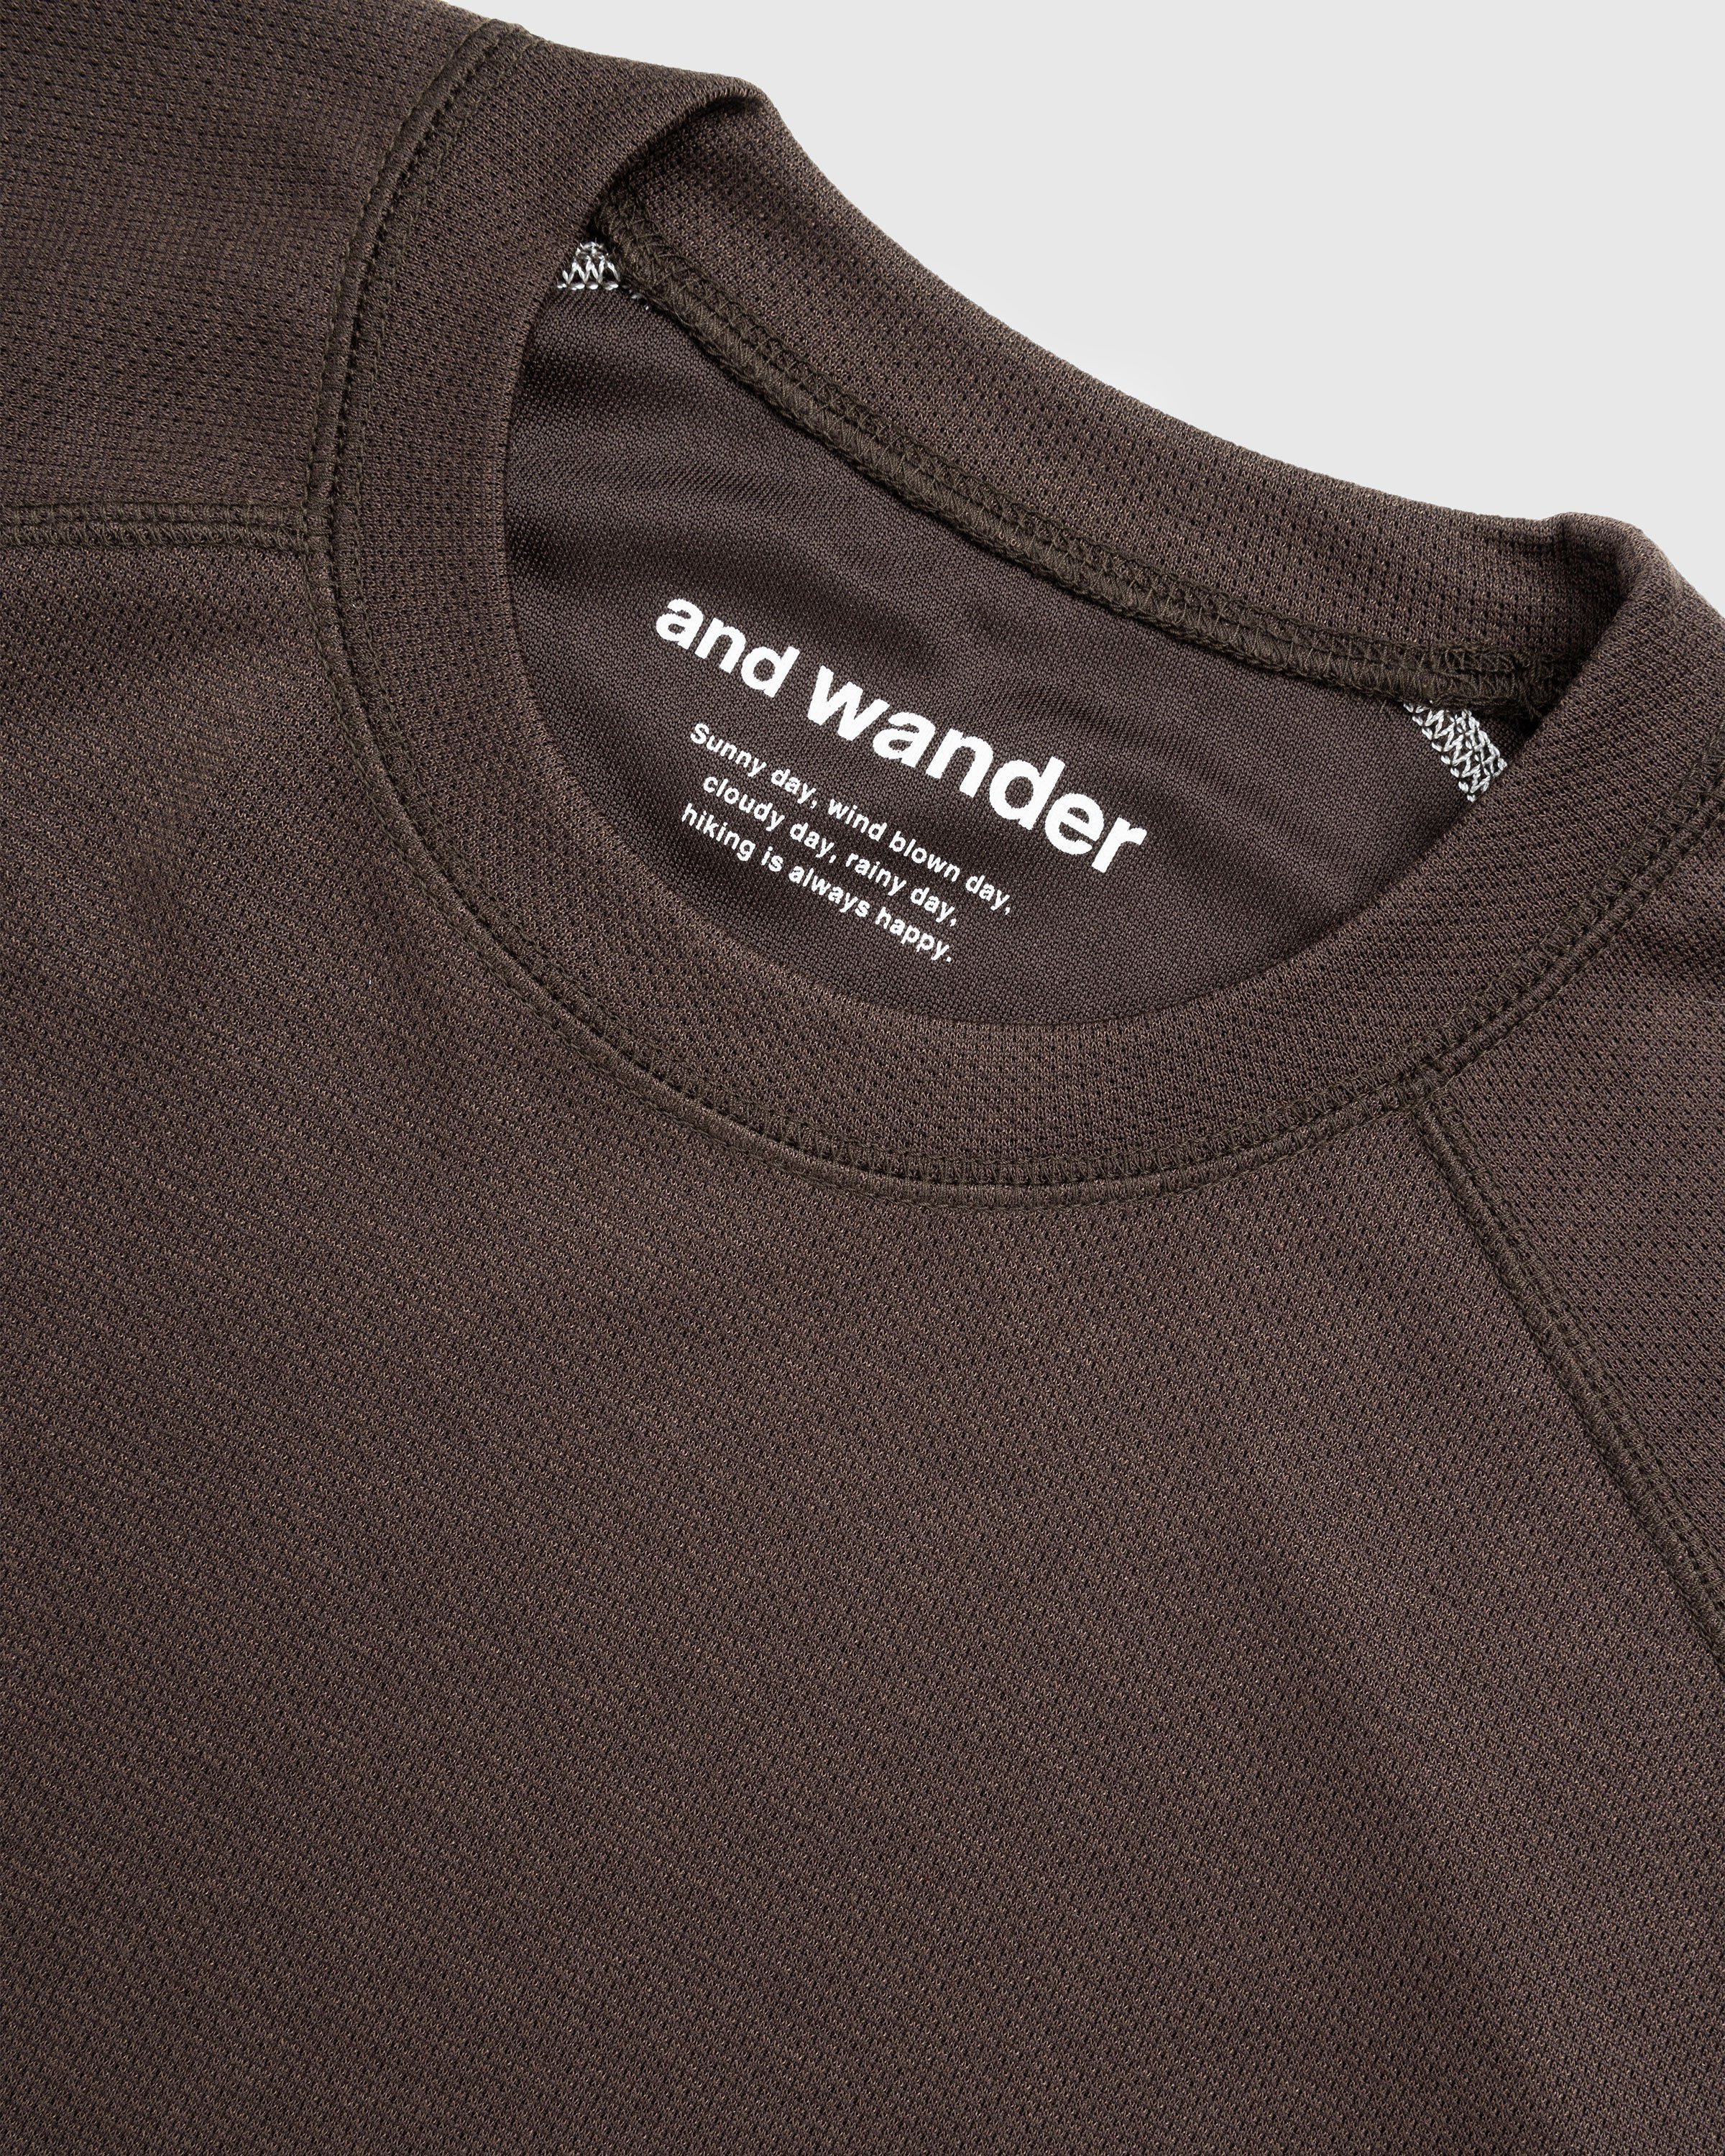 And Wander - Power Dry Jersey Raglan Long-Sleeve T-Shirt Brown - Clothing - Brown - Image 5